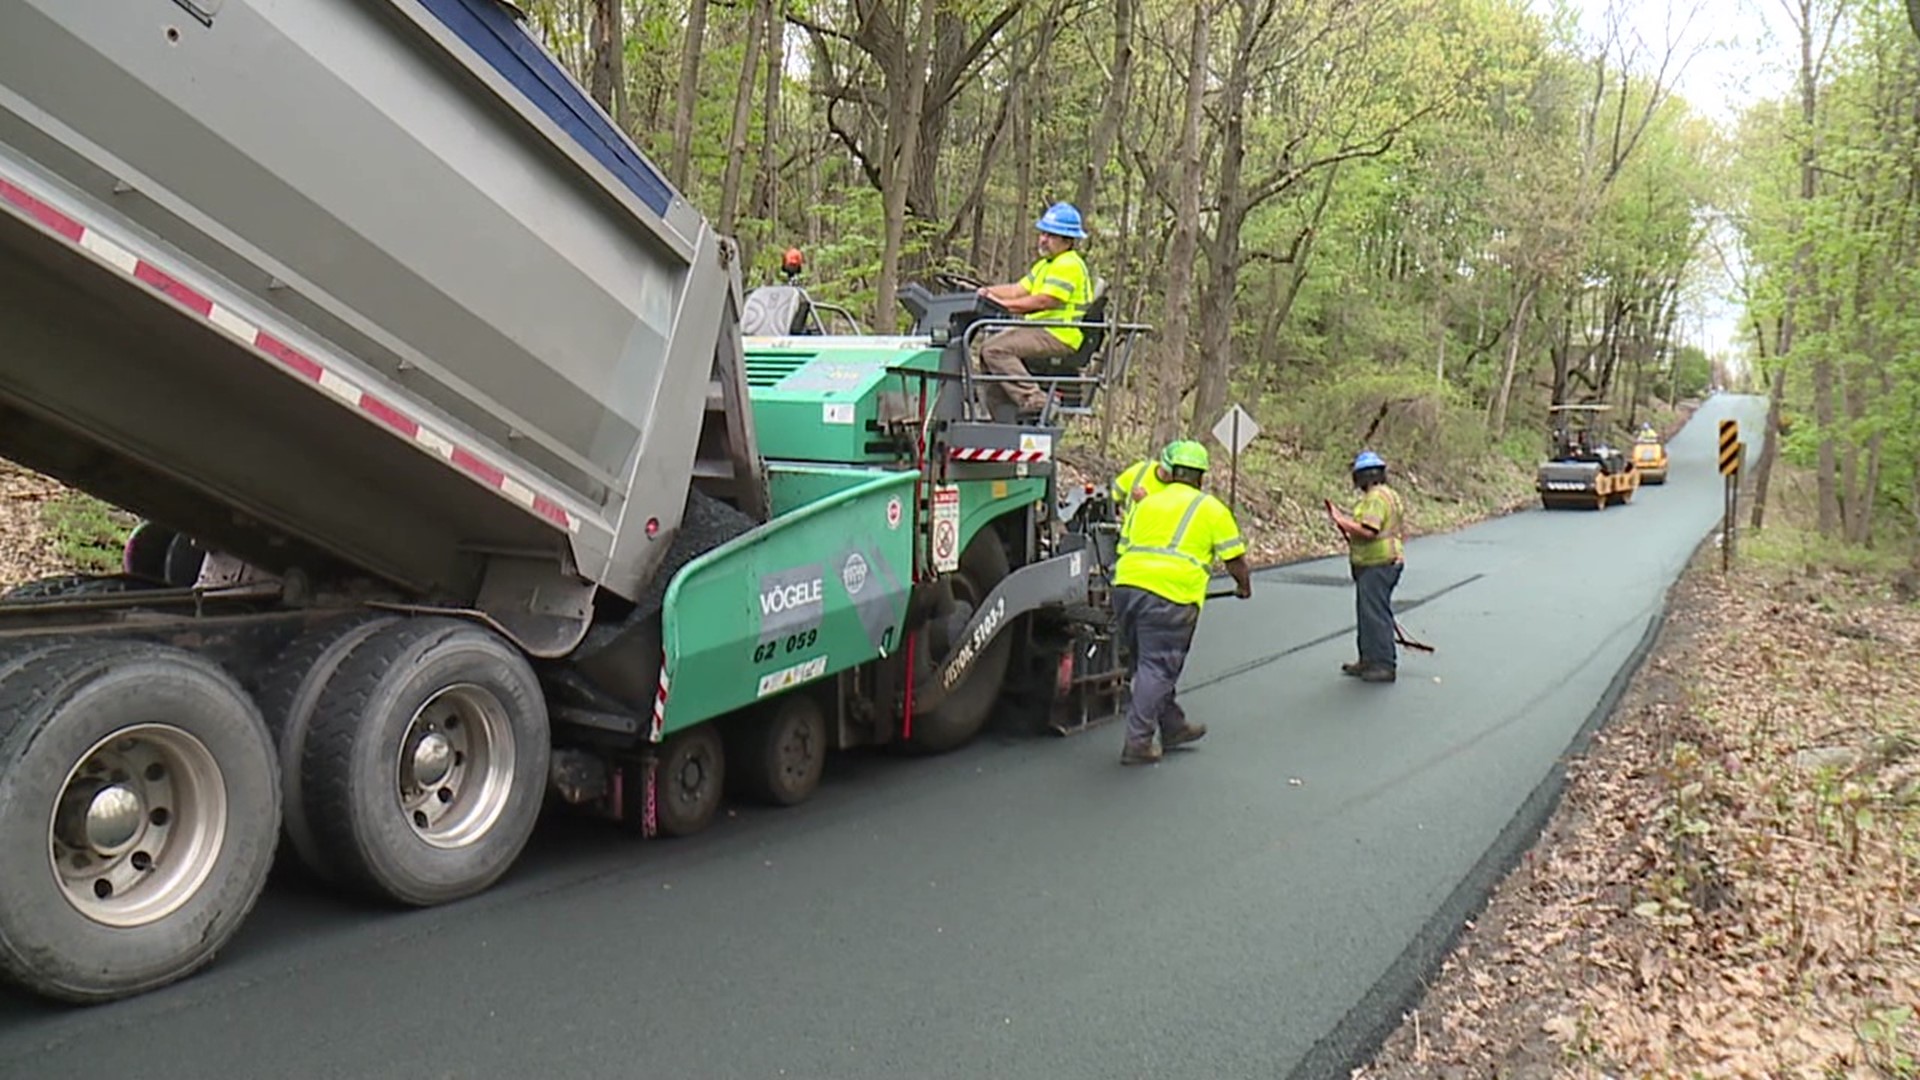 As Newswatch 16's Stacy Lange reports, some streets are getting a fresh coat of asphalt for the first time in a generation.